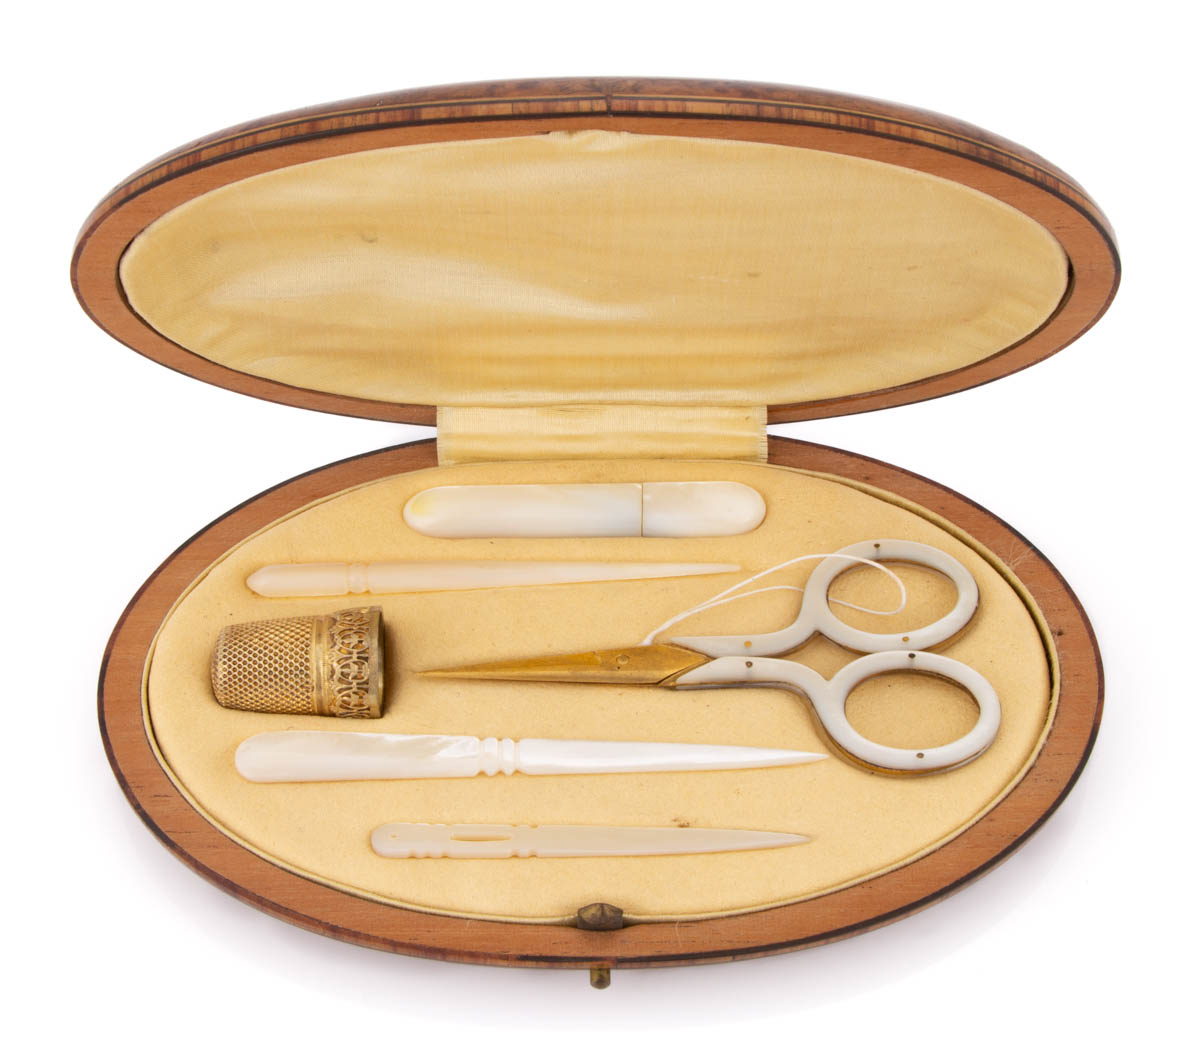 FRENCH MOTHER-OF-PEARL AND GILT METAL SEWING KIT